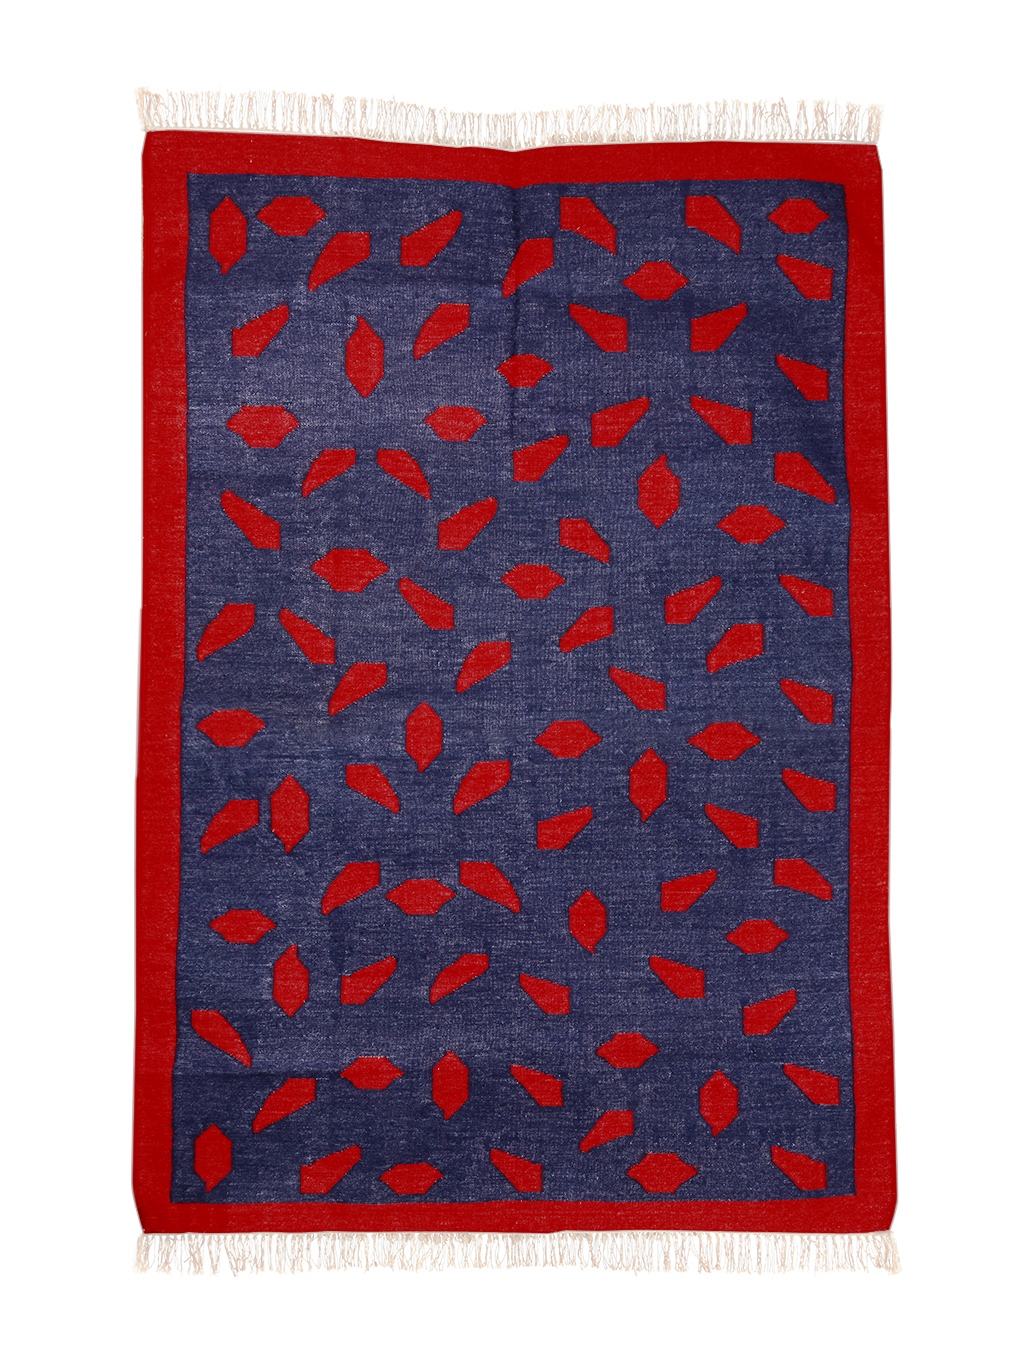 PATTA-Deep red and blue wool & cotton Dhurrie (rug) - Mahout Lifestyle